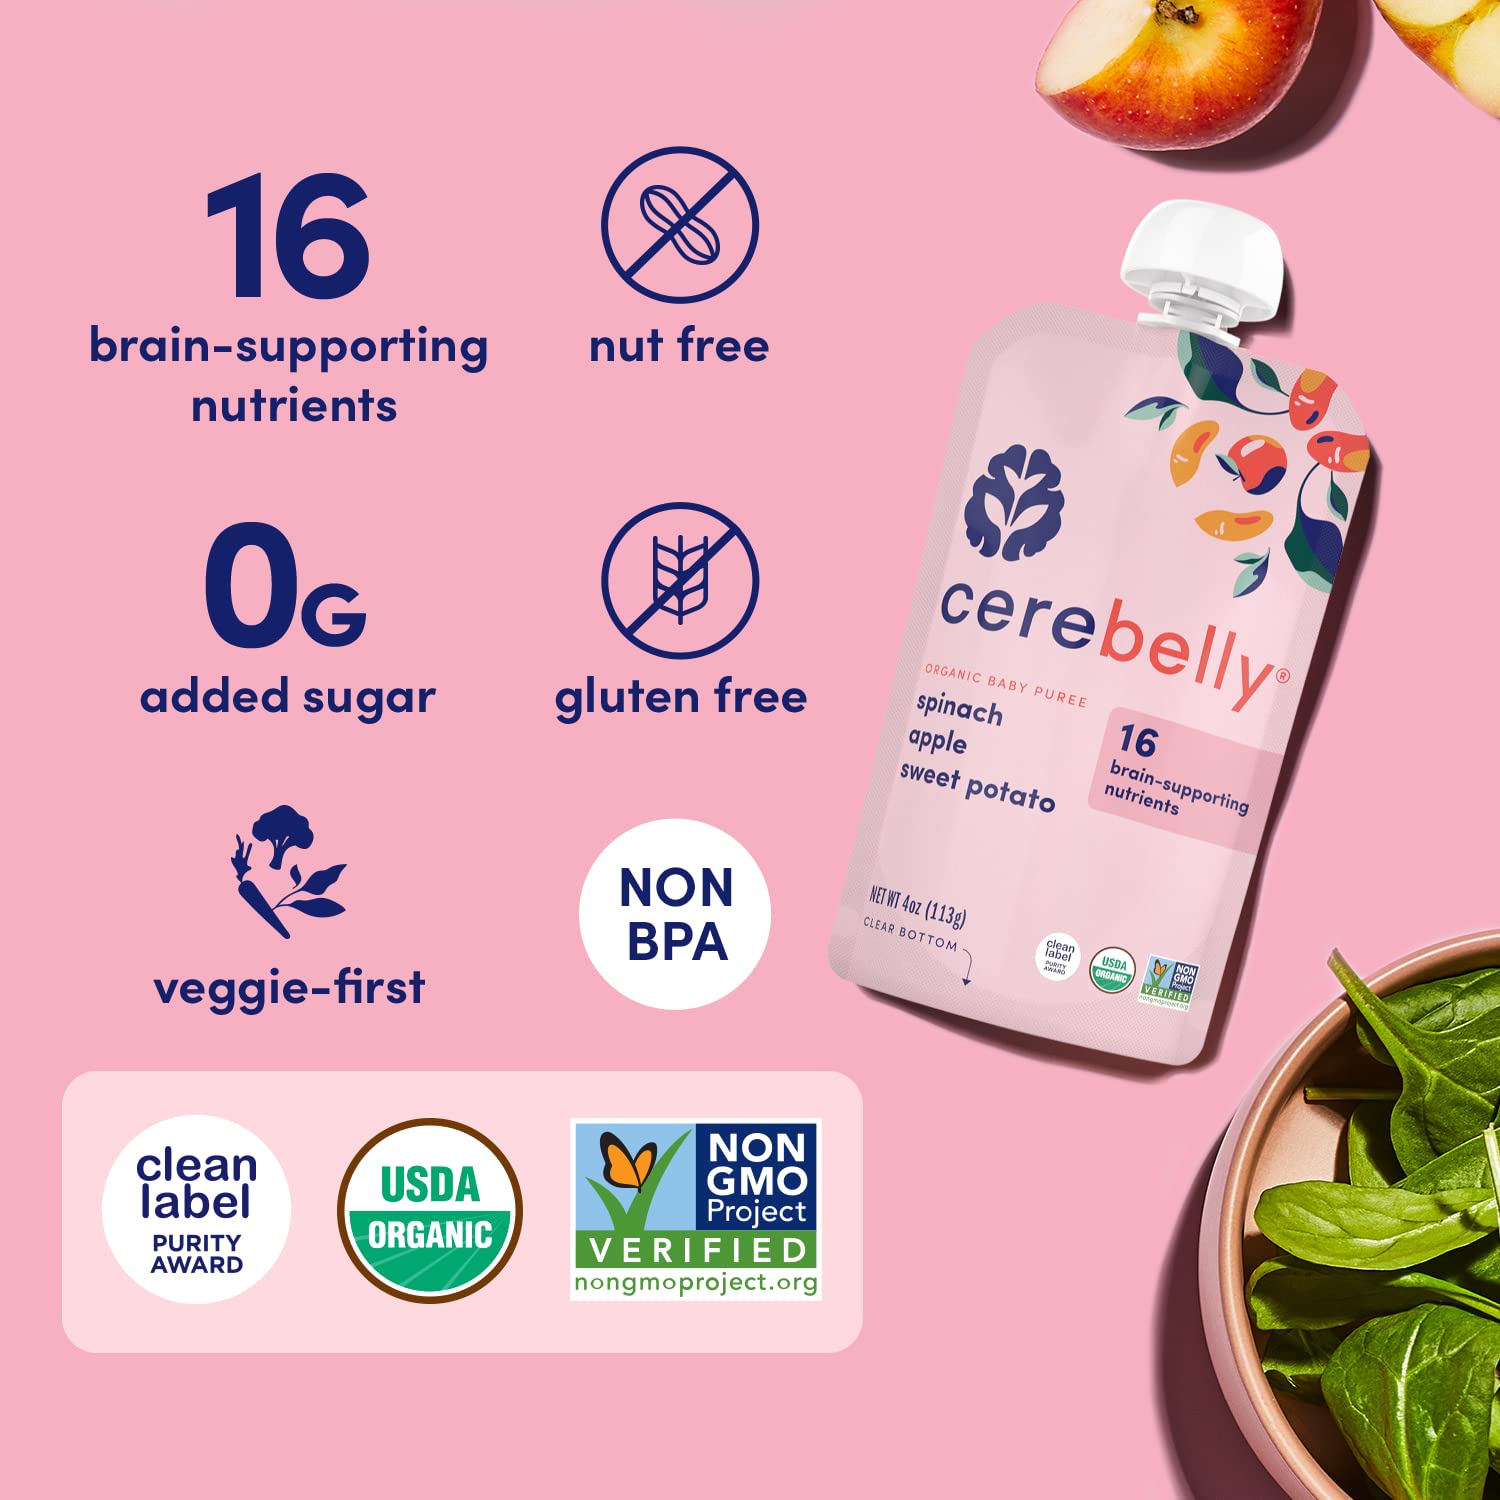 Cerebelly Baby Food Pouch – Spinach Apple Sweet Potato, Organic Fruit & Veggie Purees, Great Snack for Toddlers, 16 Brain-supporting Nutrients from Superfoods, No Added Sugar : Baby